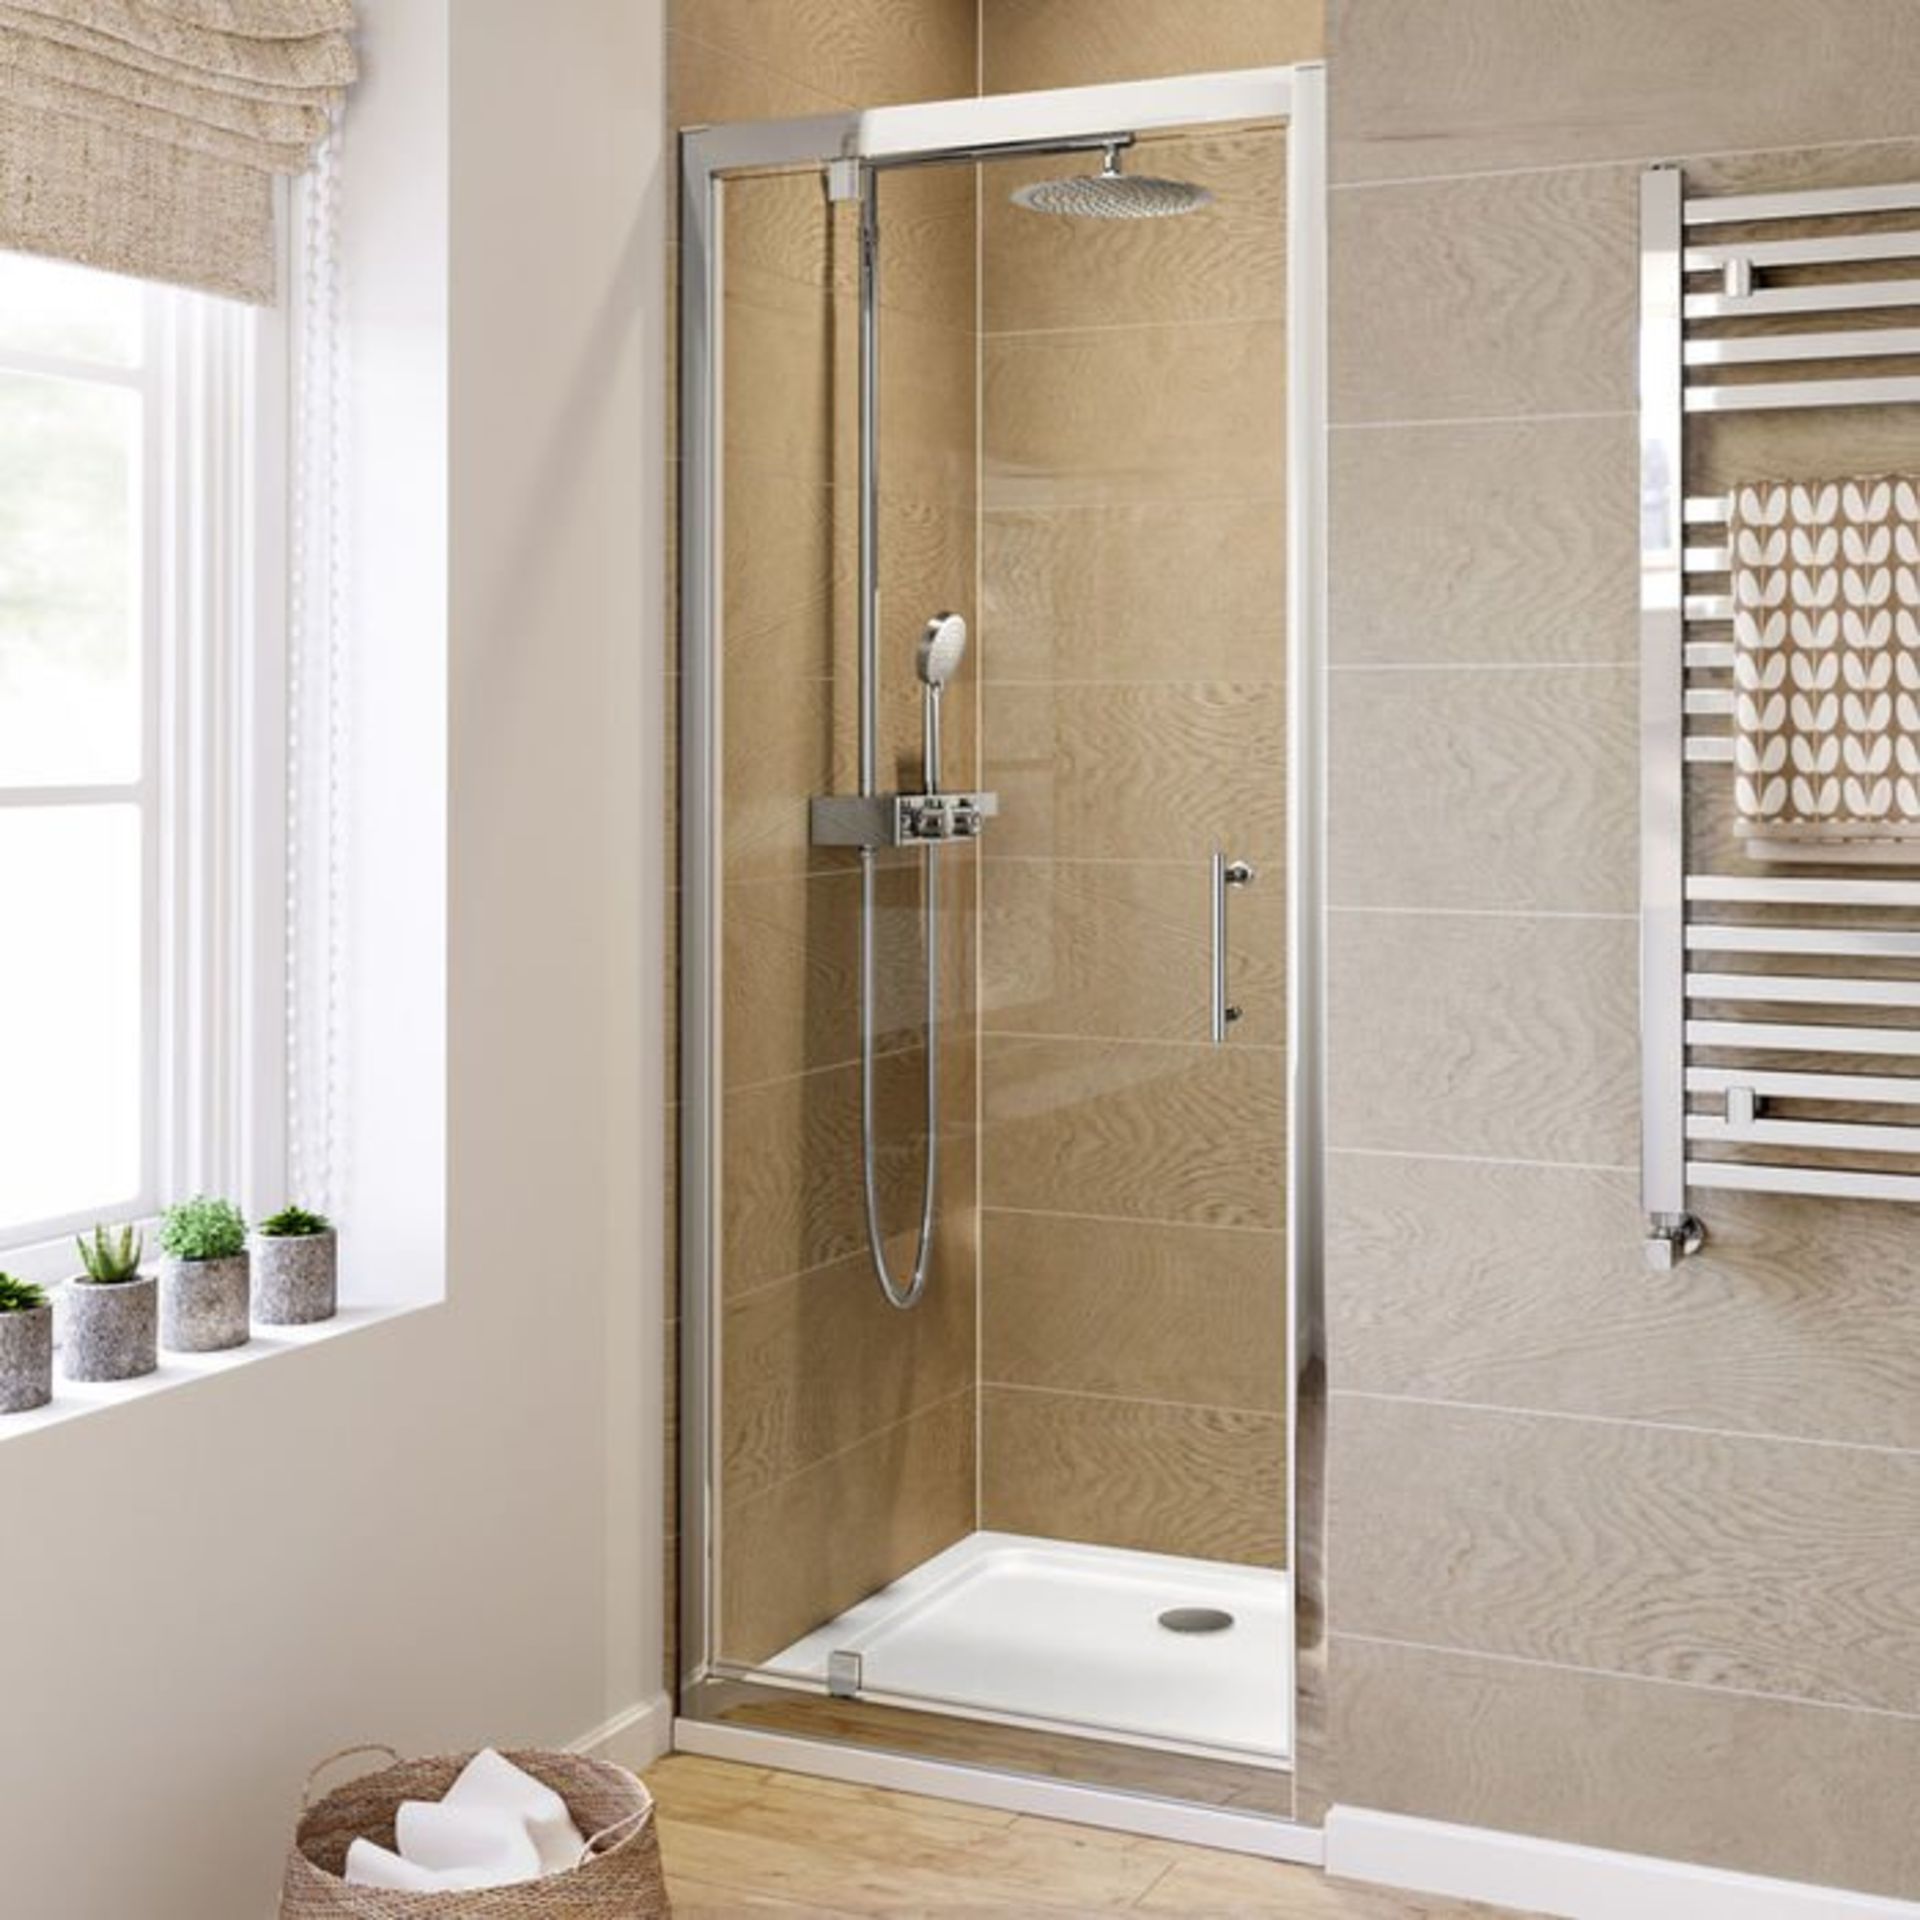 (V17) 800mm - 6mm - Elements Pivot Shower Door RRP £299.99 6mm Safety Glass Fully waterproof - Image 2 of 3